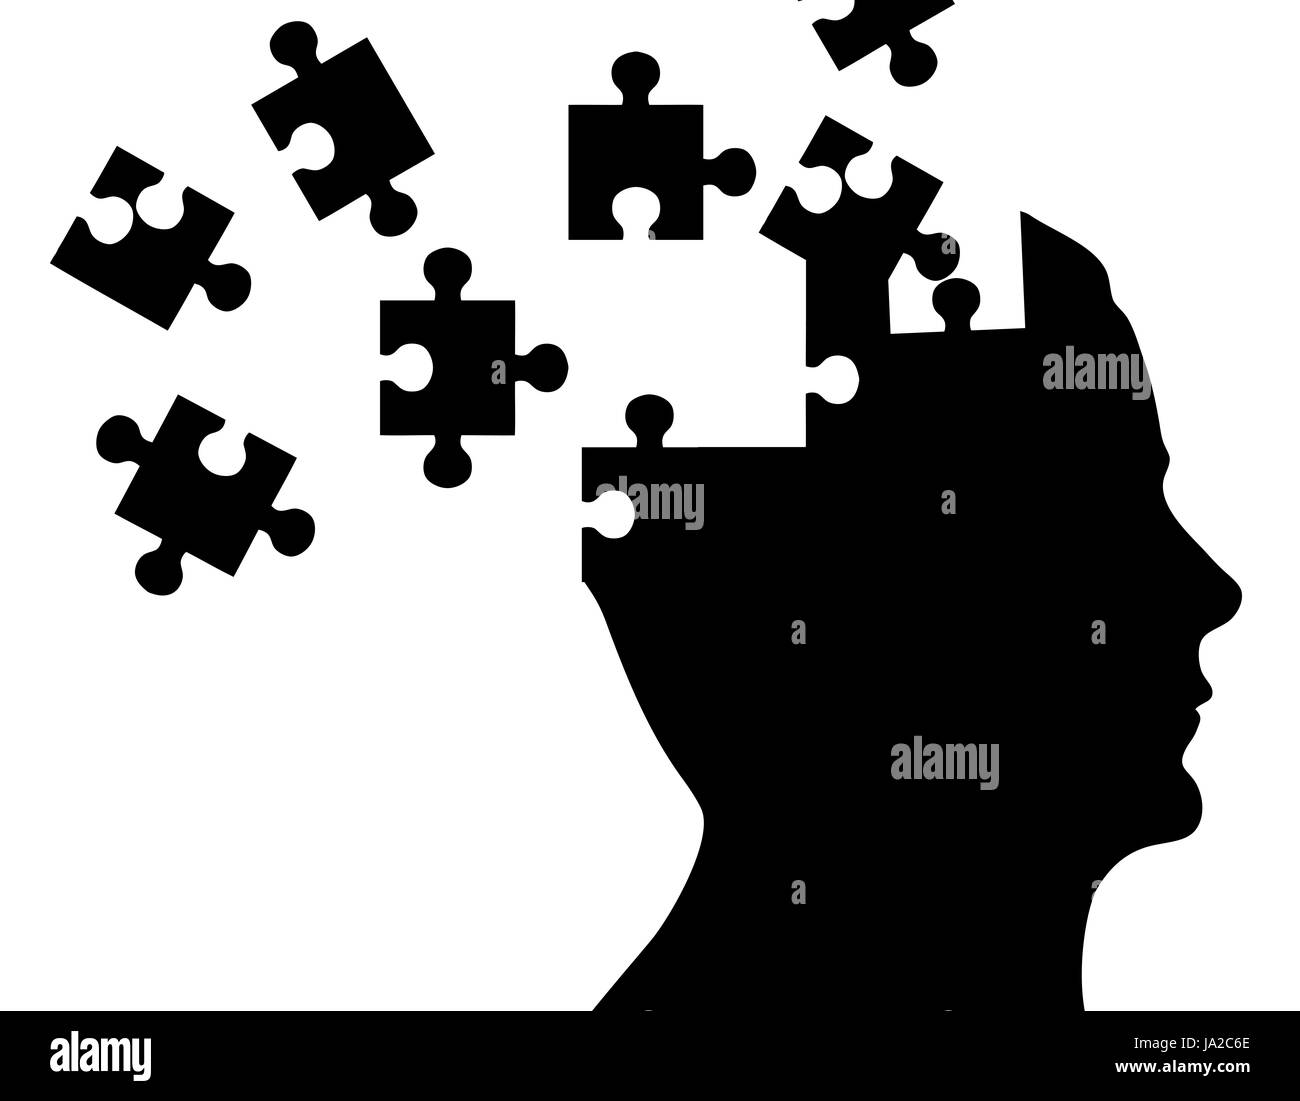 problem, confused, baffled, brain, complicated, thinking, choice, energy, Stock Photo